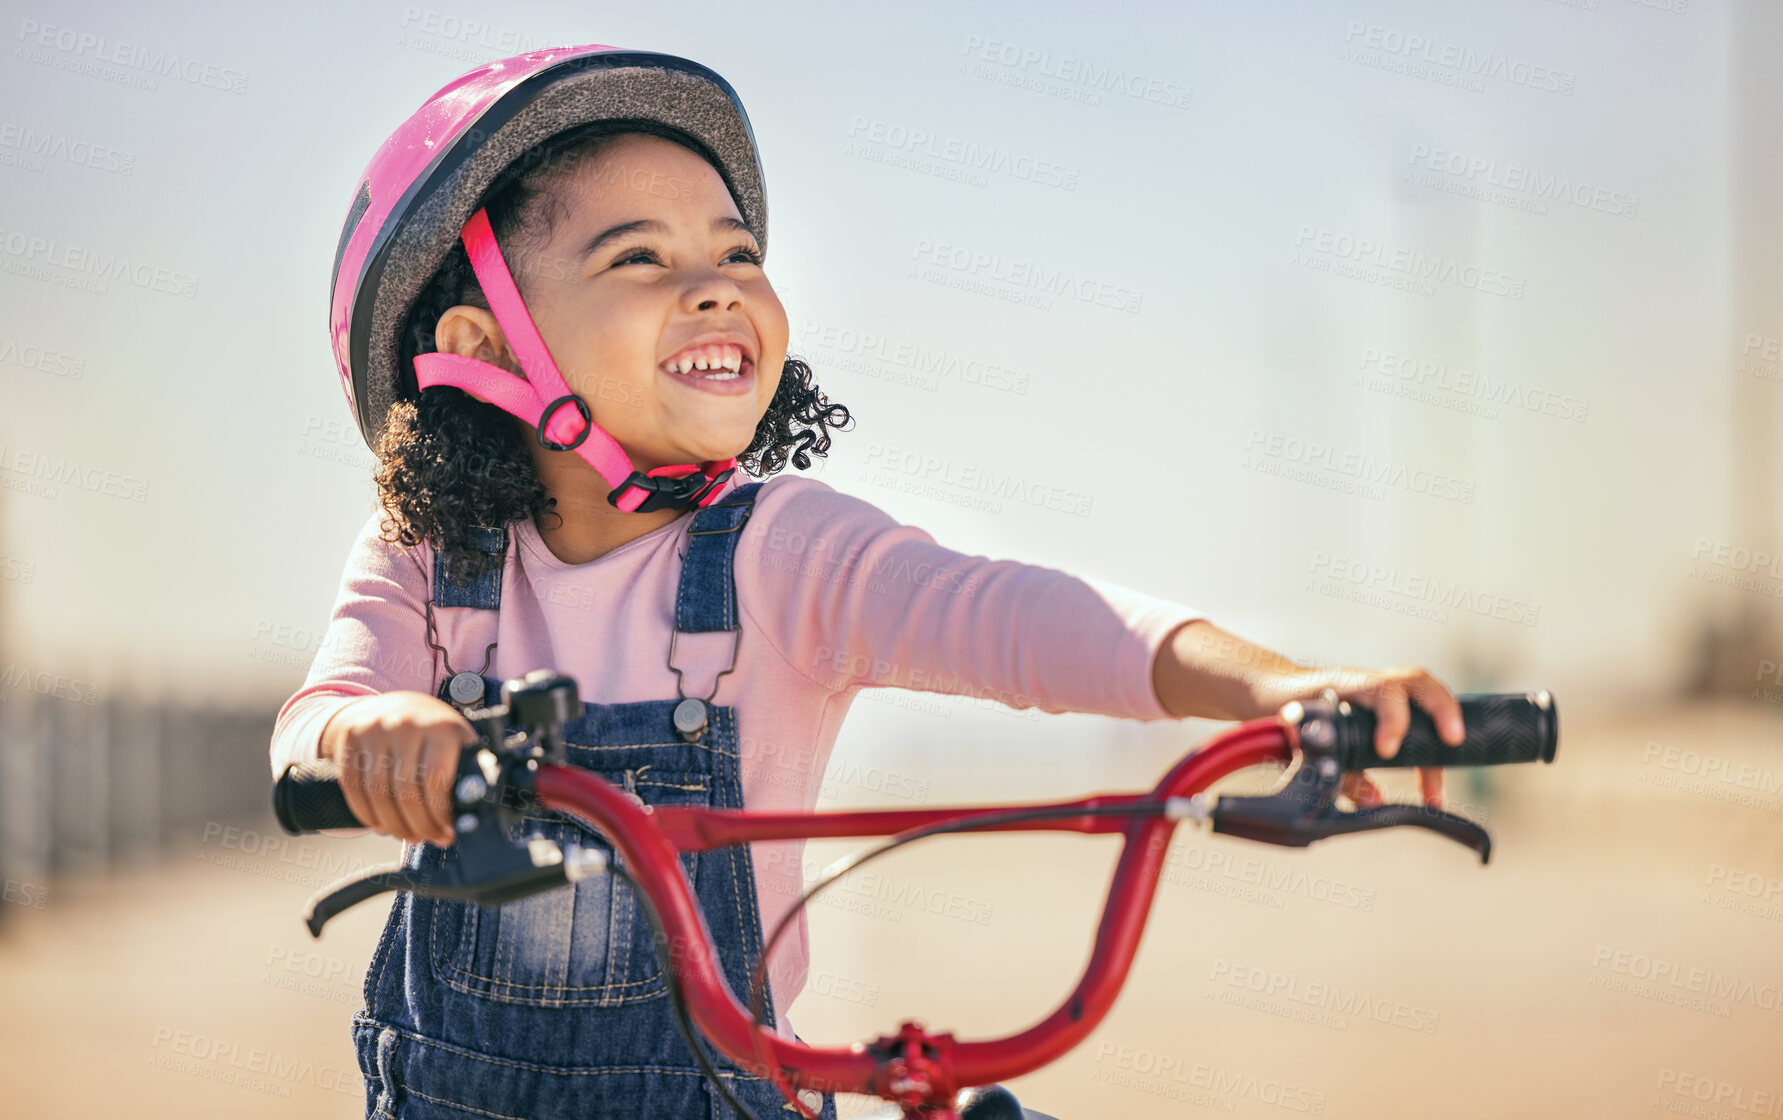 Buy stock photo Thinking, eco friendly and girl cycling on a bike, learning and training in city with a smile. Playing, exercise and child on a bicycle for carbon footprint, sustainability and happy in the street